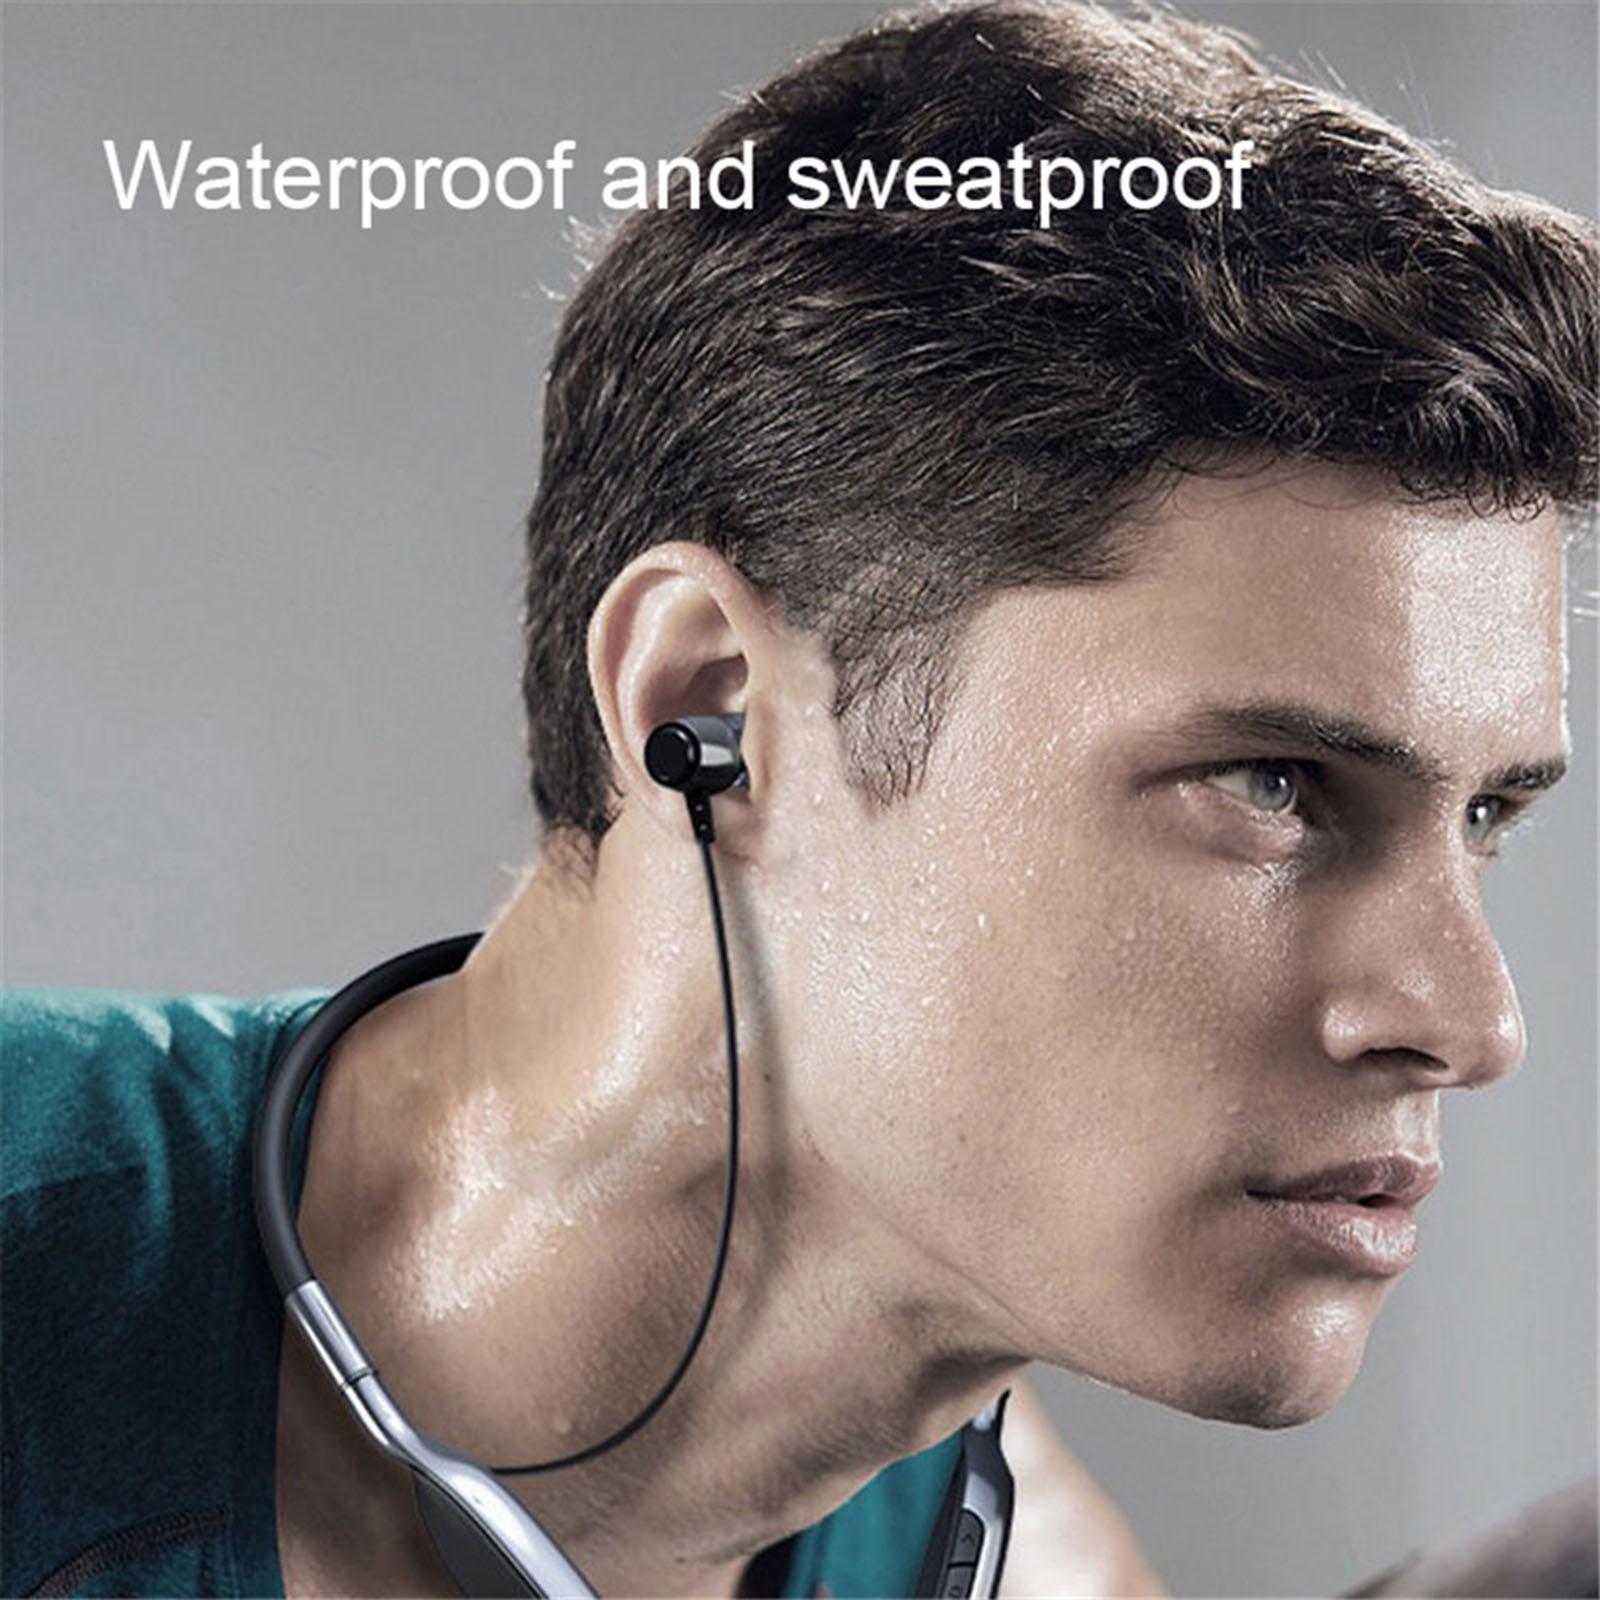 Gym Sport Earphones Wireless w/Mic Bluetooth Headphones for Home Office Red